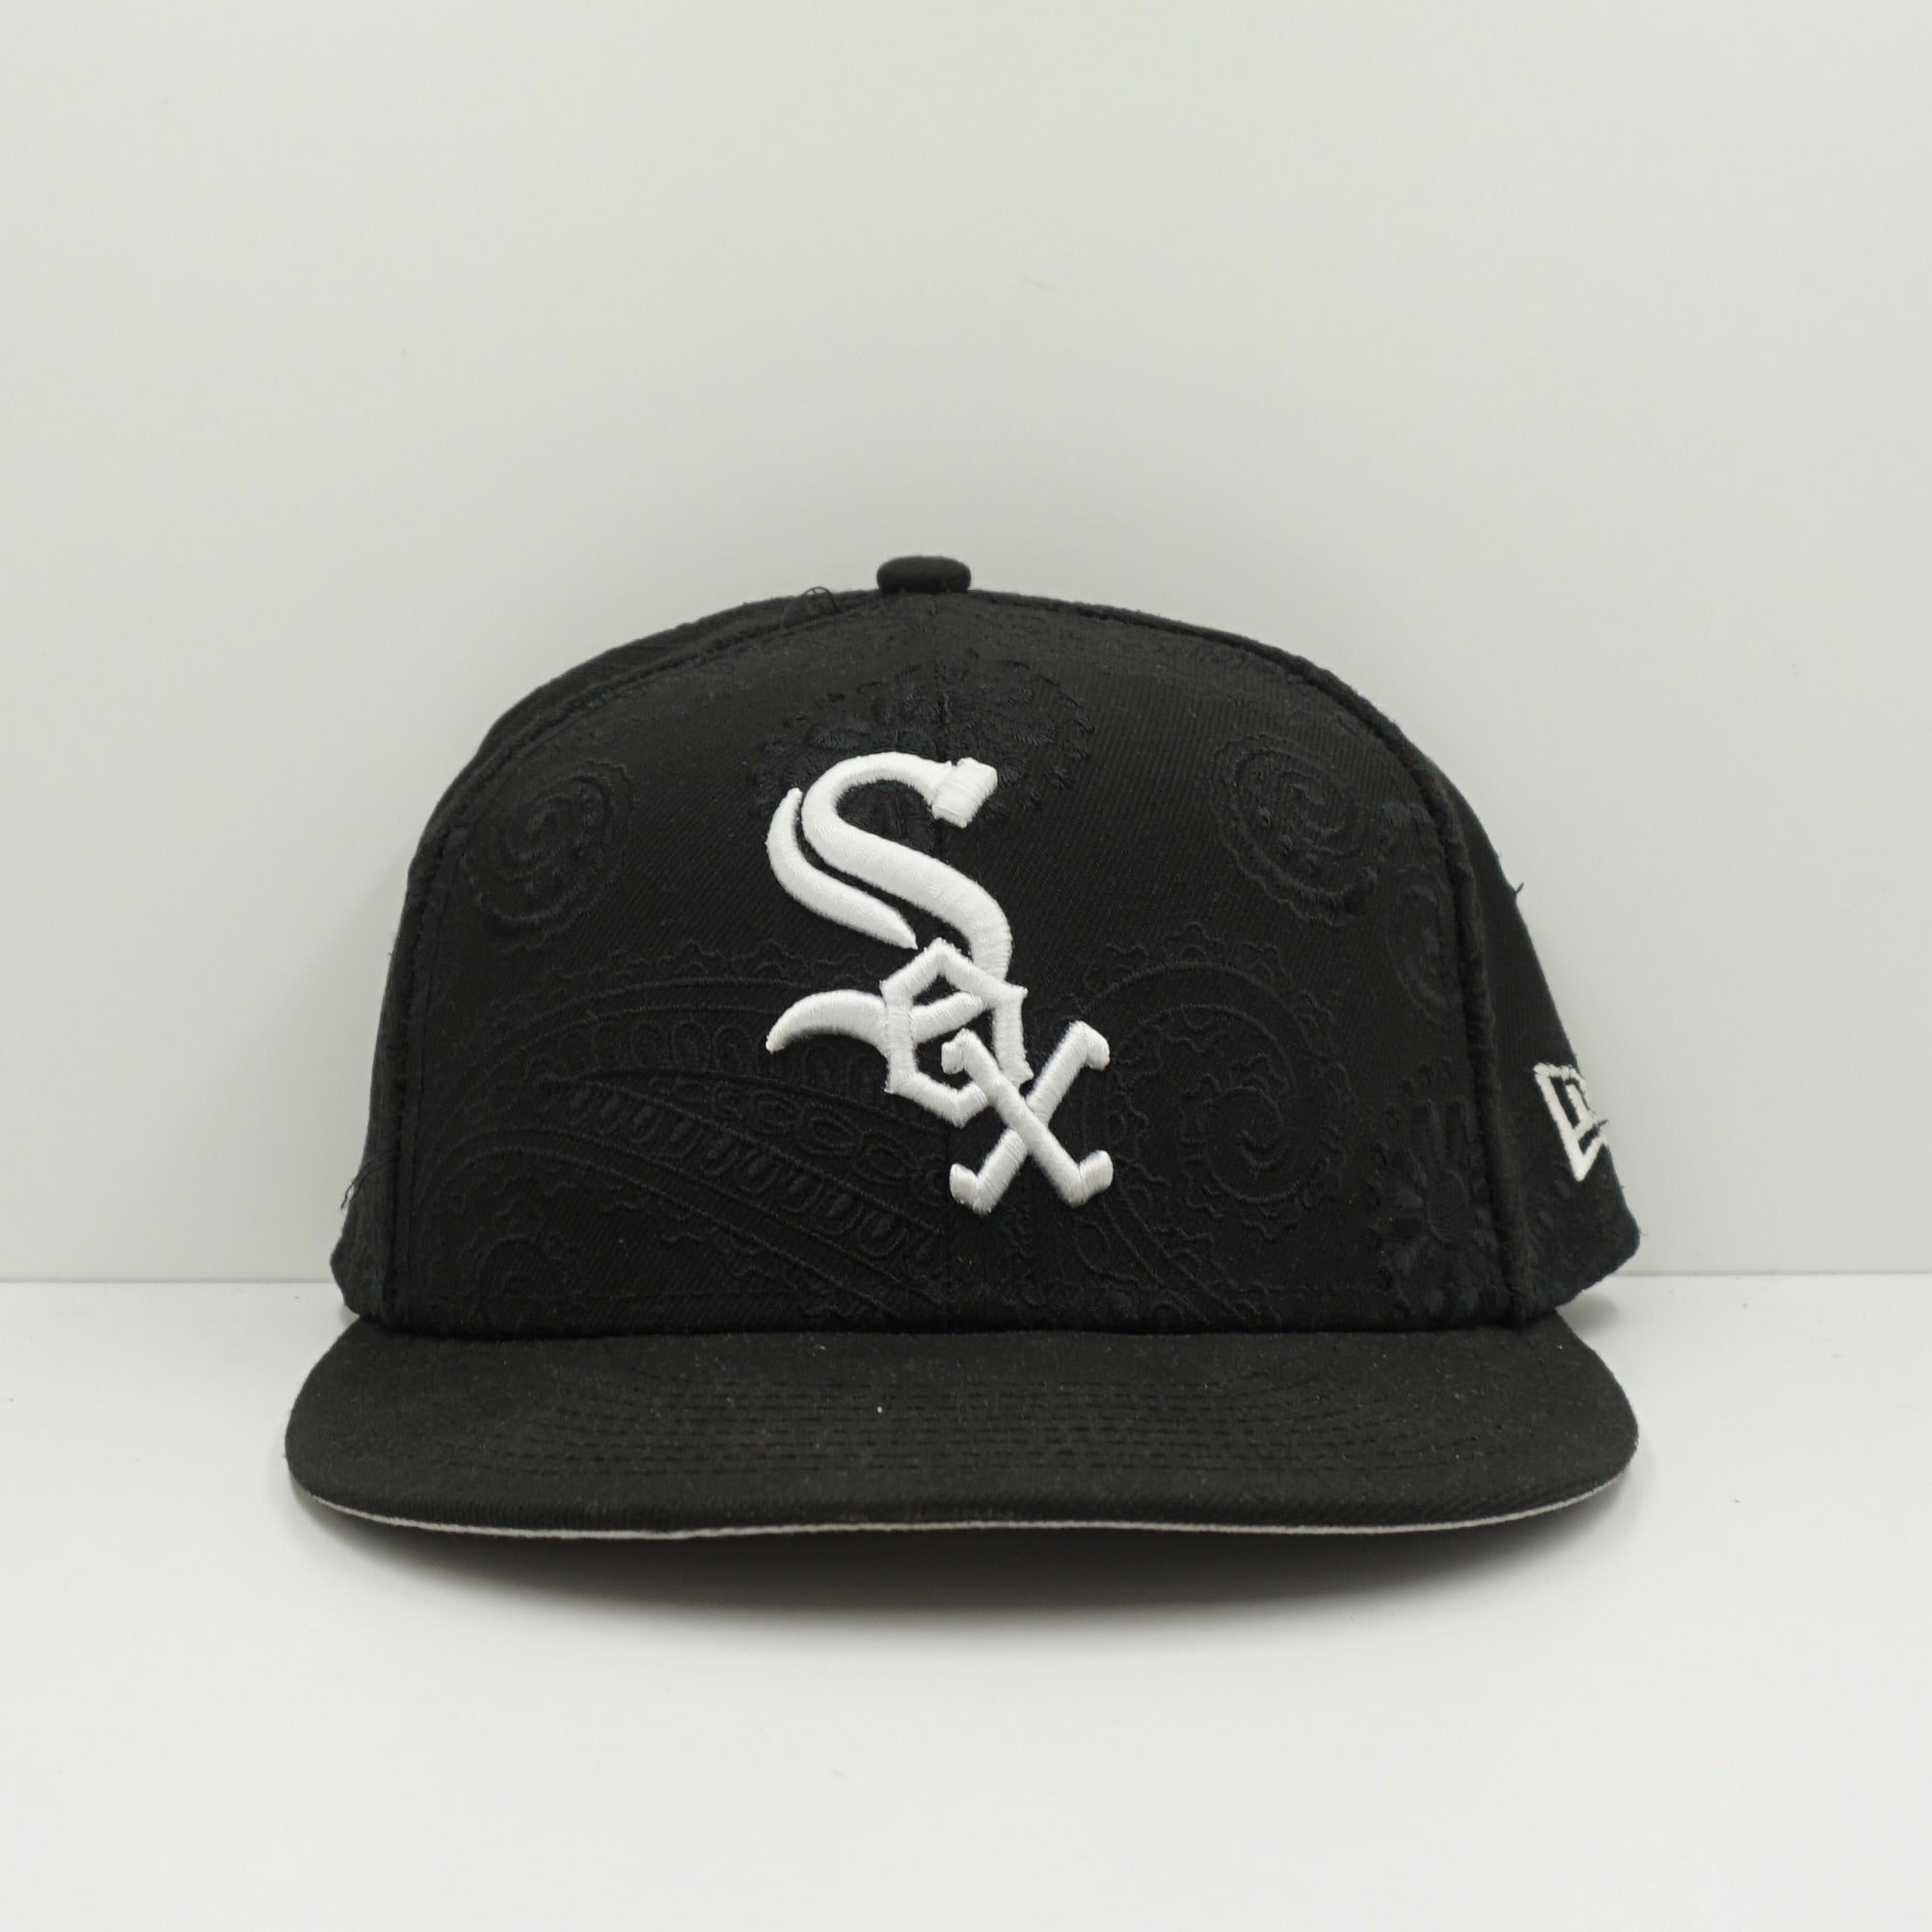 New Era Sox Black Embroidered Fitted Cap